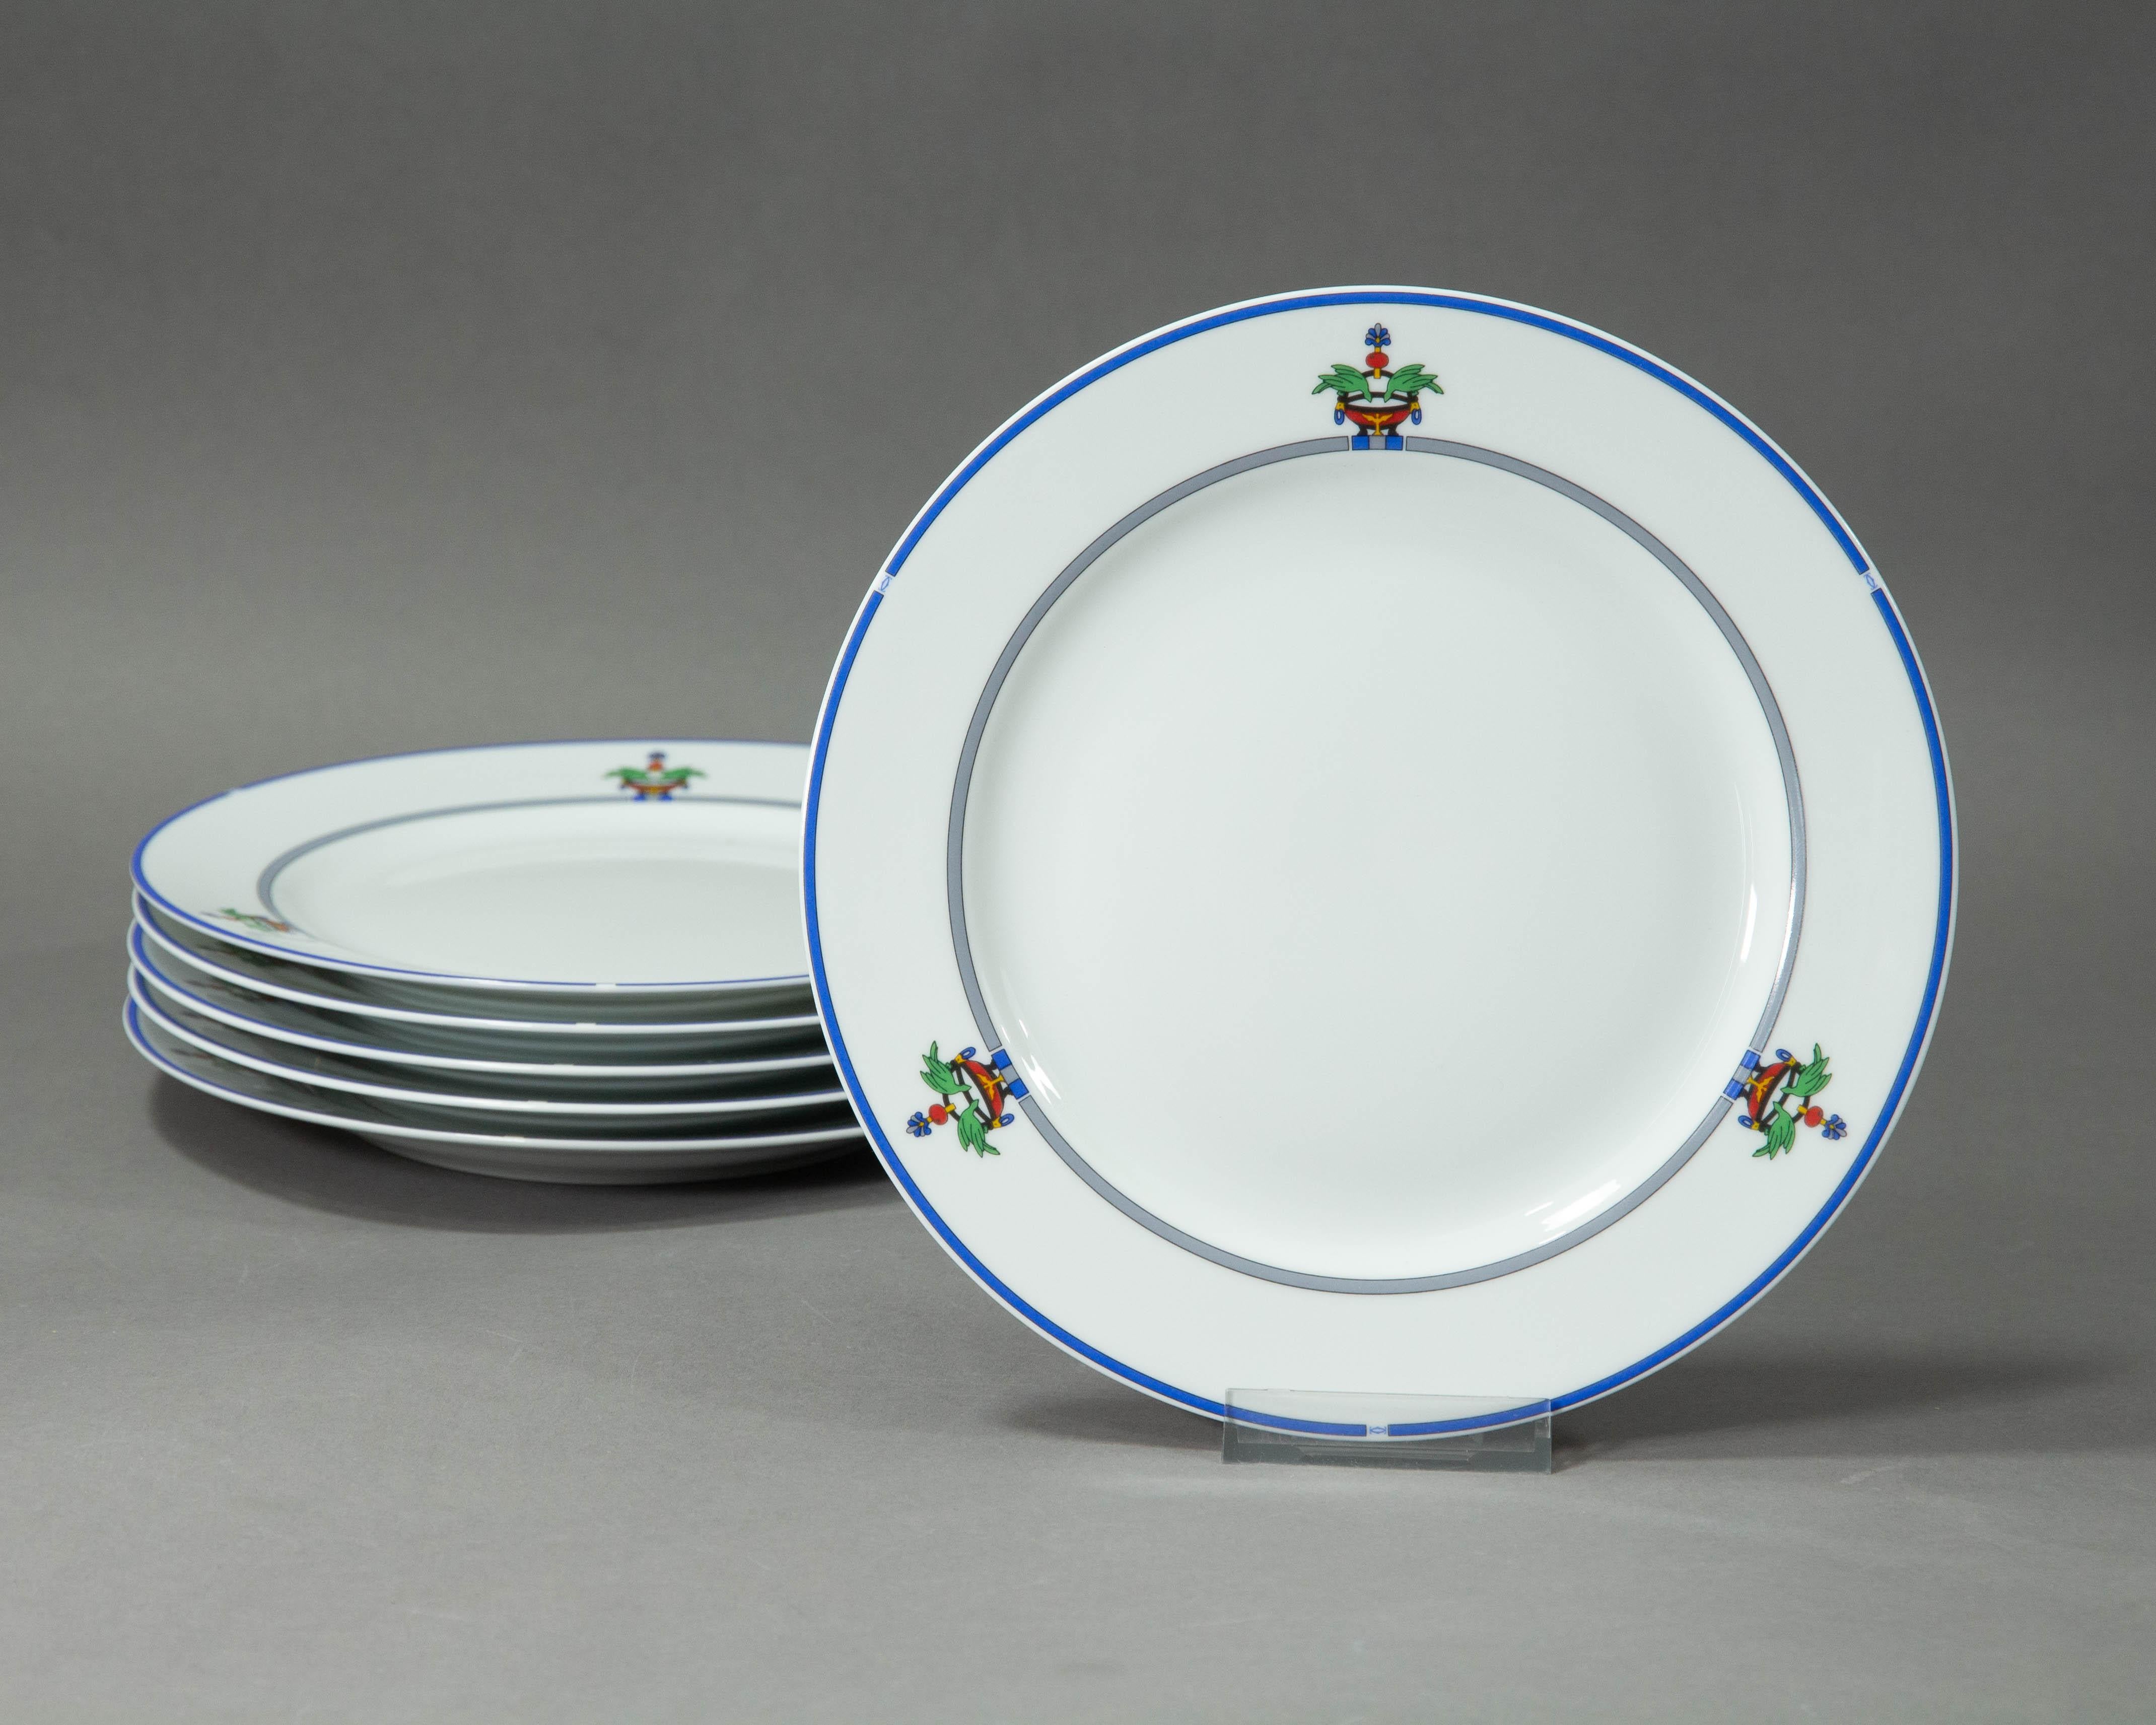 A Cartier Venetienne lunch plate.

The porcelain plate was made in Limoges for Cartier La Maison in 1989, the decoration is called 'Venetienne'.

The luxury jeweller and watchmaker Cartier made a range of high end housewares in the 1980s and